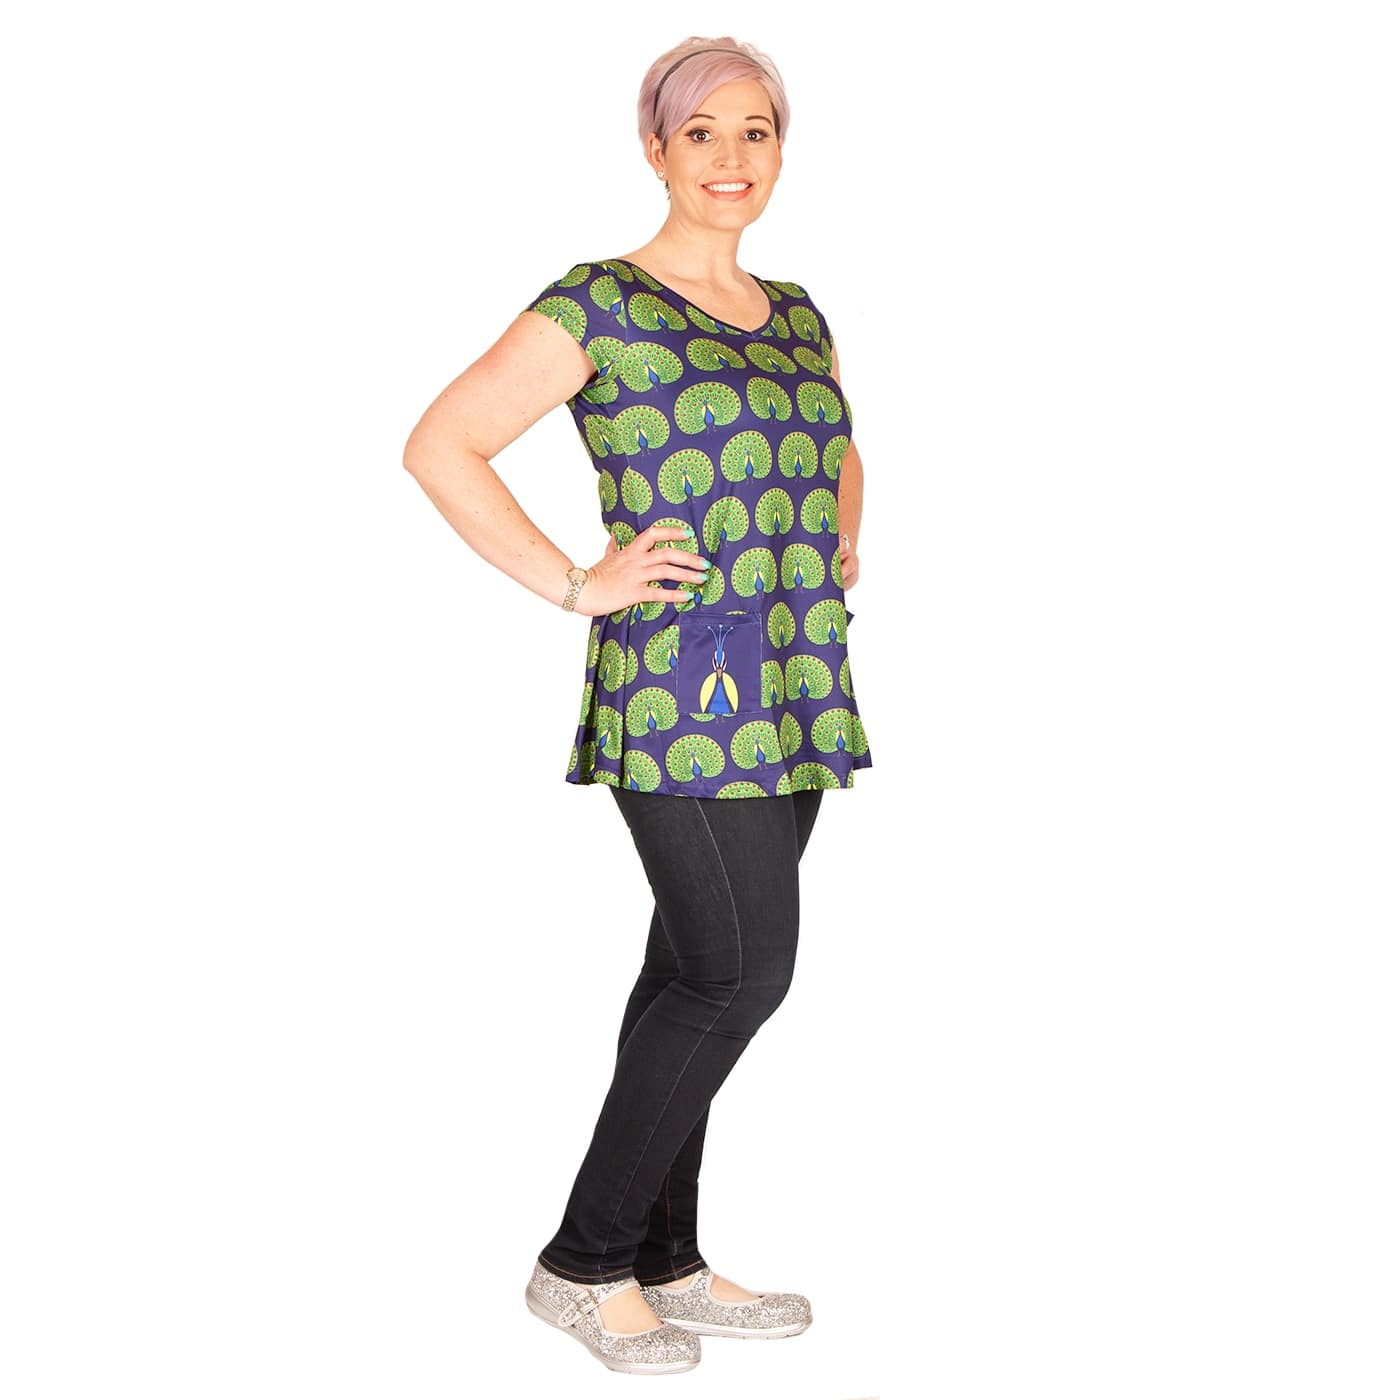 Olive Top Top by RainbowsAndFairies.com (Peacock - Bird - Feathers - Mod Retro - Top With Pockets - Vintage Inspired) - SKU: CL_TUNIC_OLIVE_MIN - 04